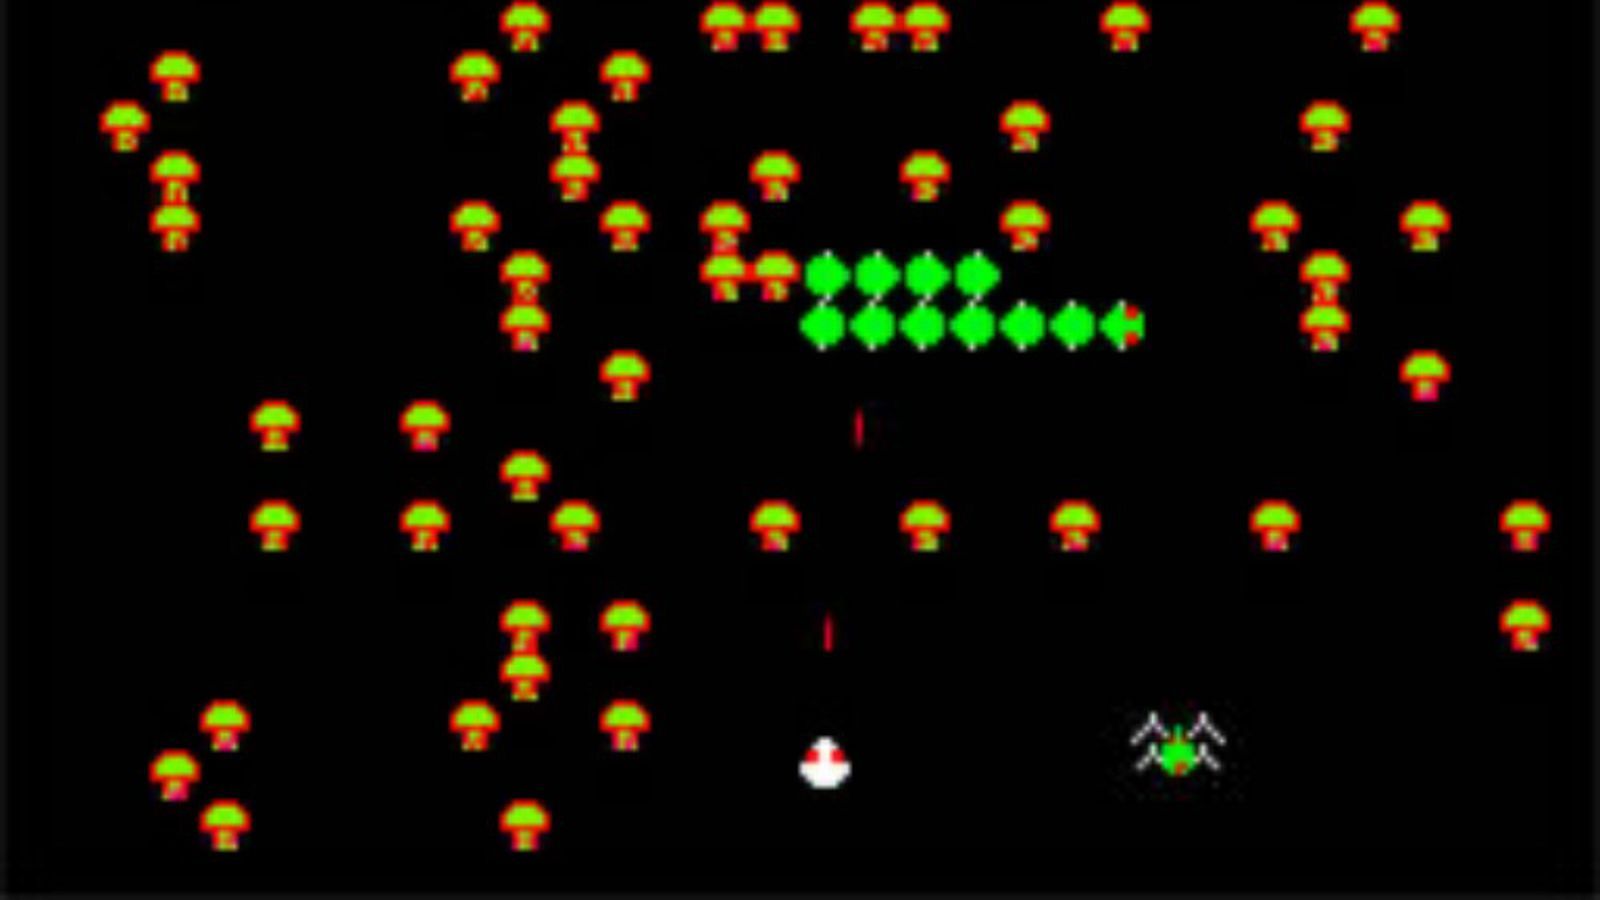 Centipede: 10 Mind Blowing Facts About The Arcade Classic